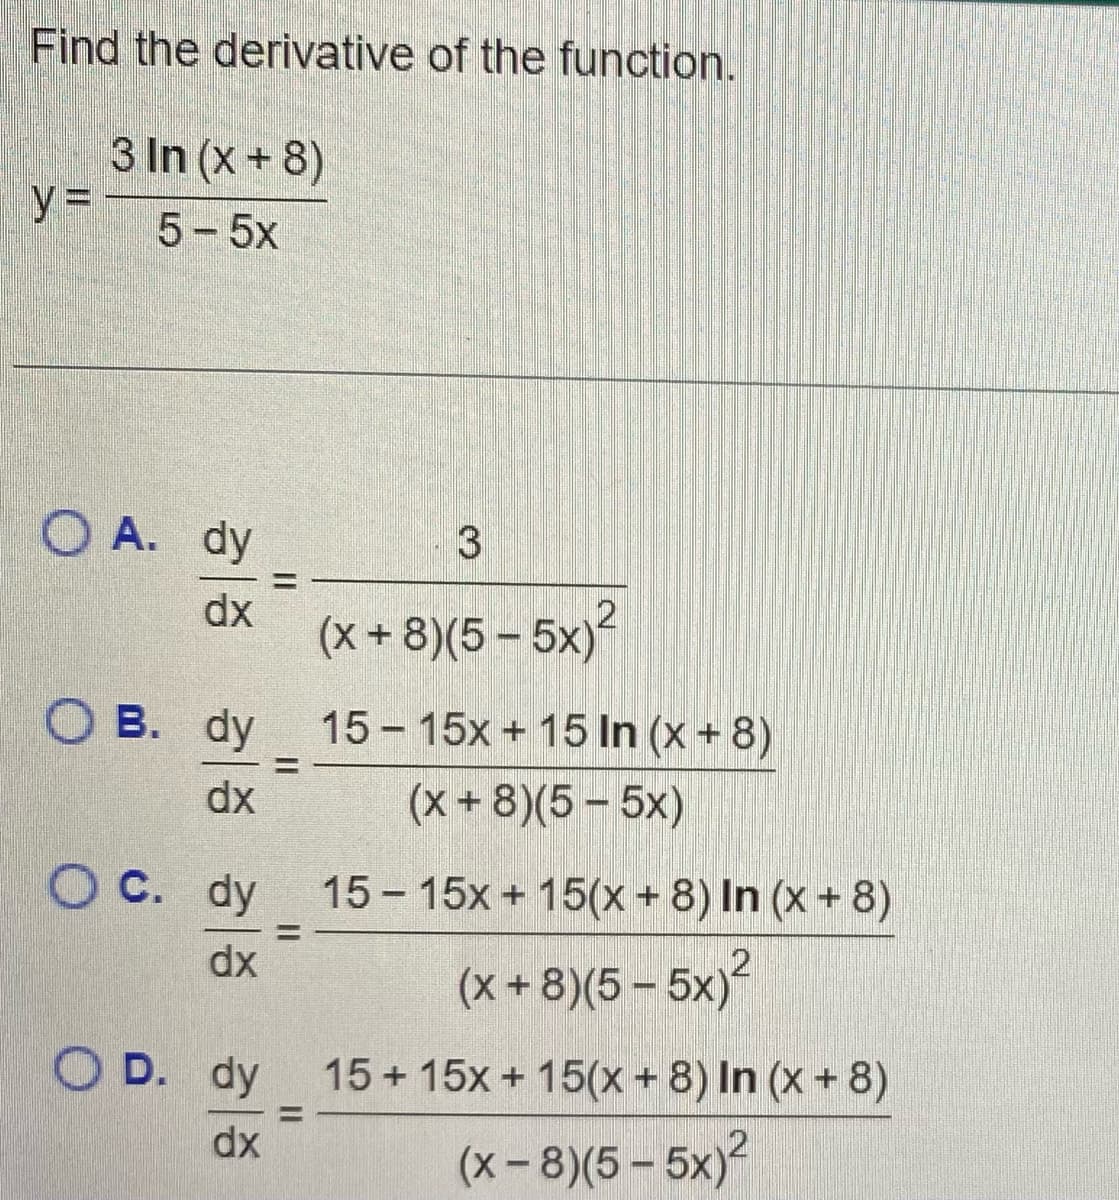 Find the derivative of the function.
3 In (x +8)
y =
5-5x
O A. dy
%3D
dx
(x + 8)(5 – 5x)
О в. dy
15 - 15x + 15 In (x + 8)
%3D
dx
(x+8)(5- 5x)
O C. dy 15- 15x + 15(x + 8) In (x + 8)
%3D
dx
(x + 8)(5 – 5x)
O D. dy
15 + 15x + 15(x+ 8) In (x + 8)
%3D
dx
(x-8)(5 - 5x)?
3.
II
